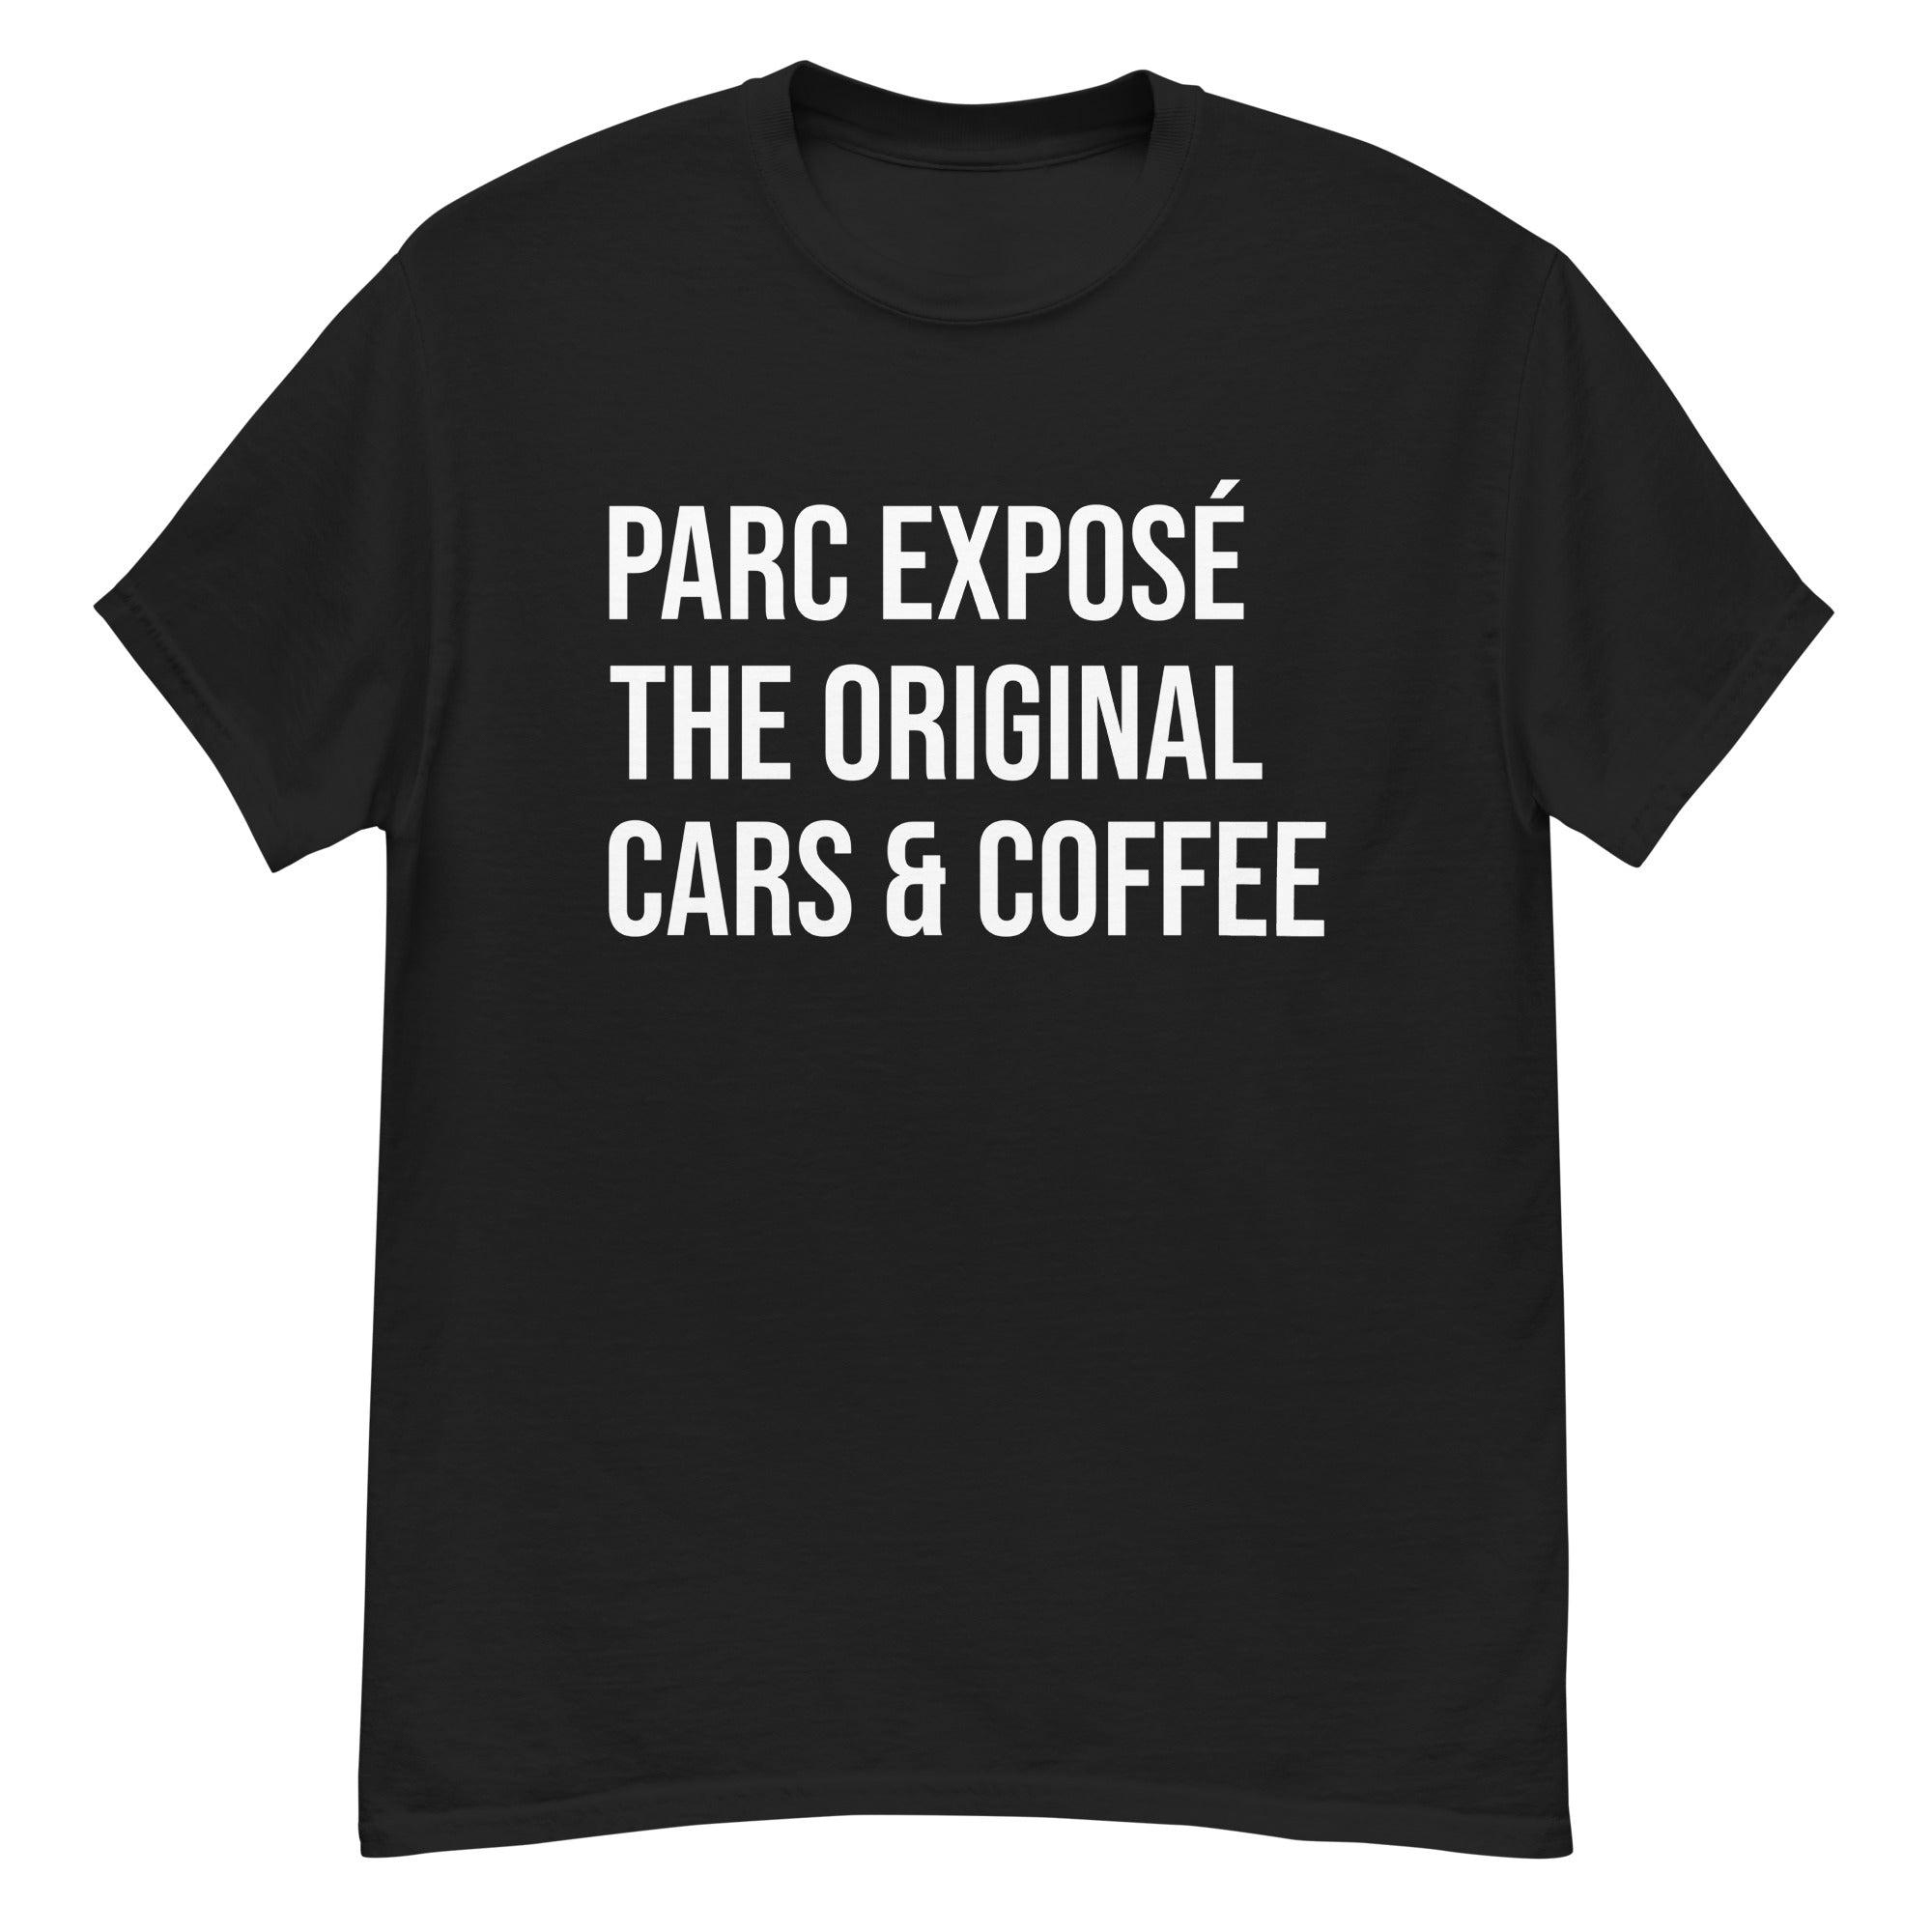 Parc Exposé is the Original Cars and Coffee